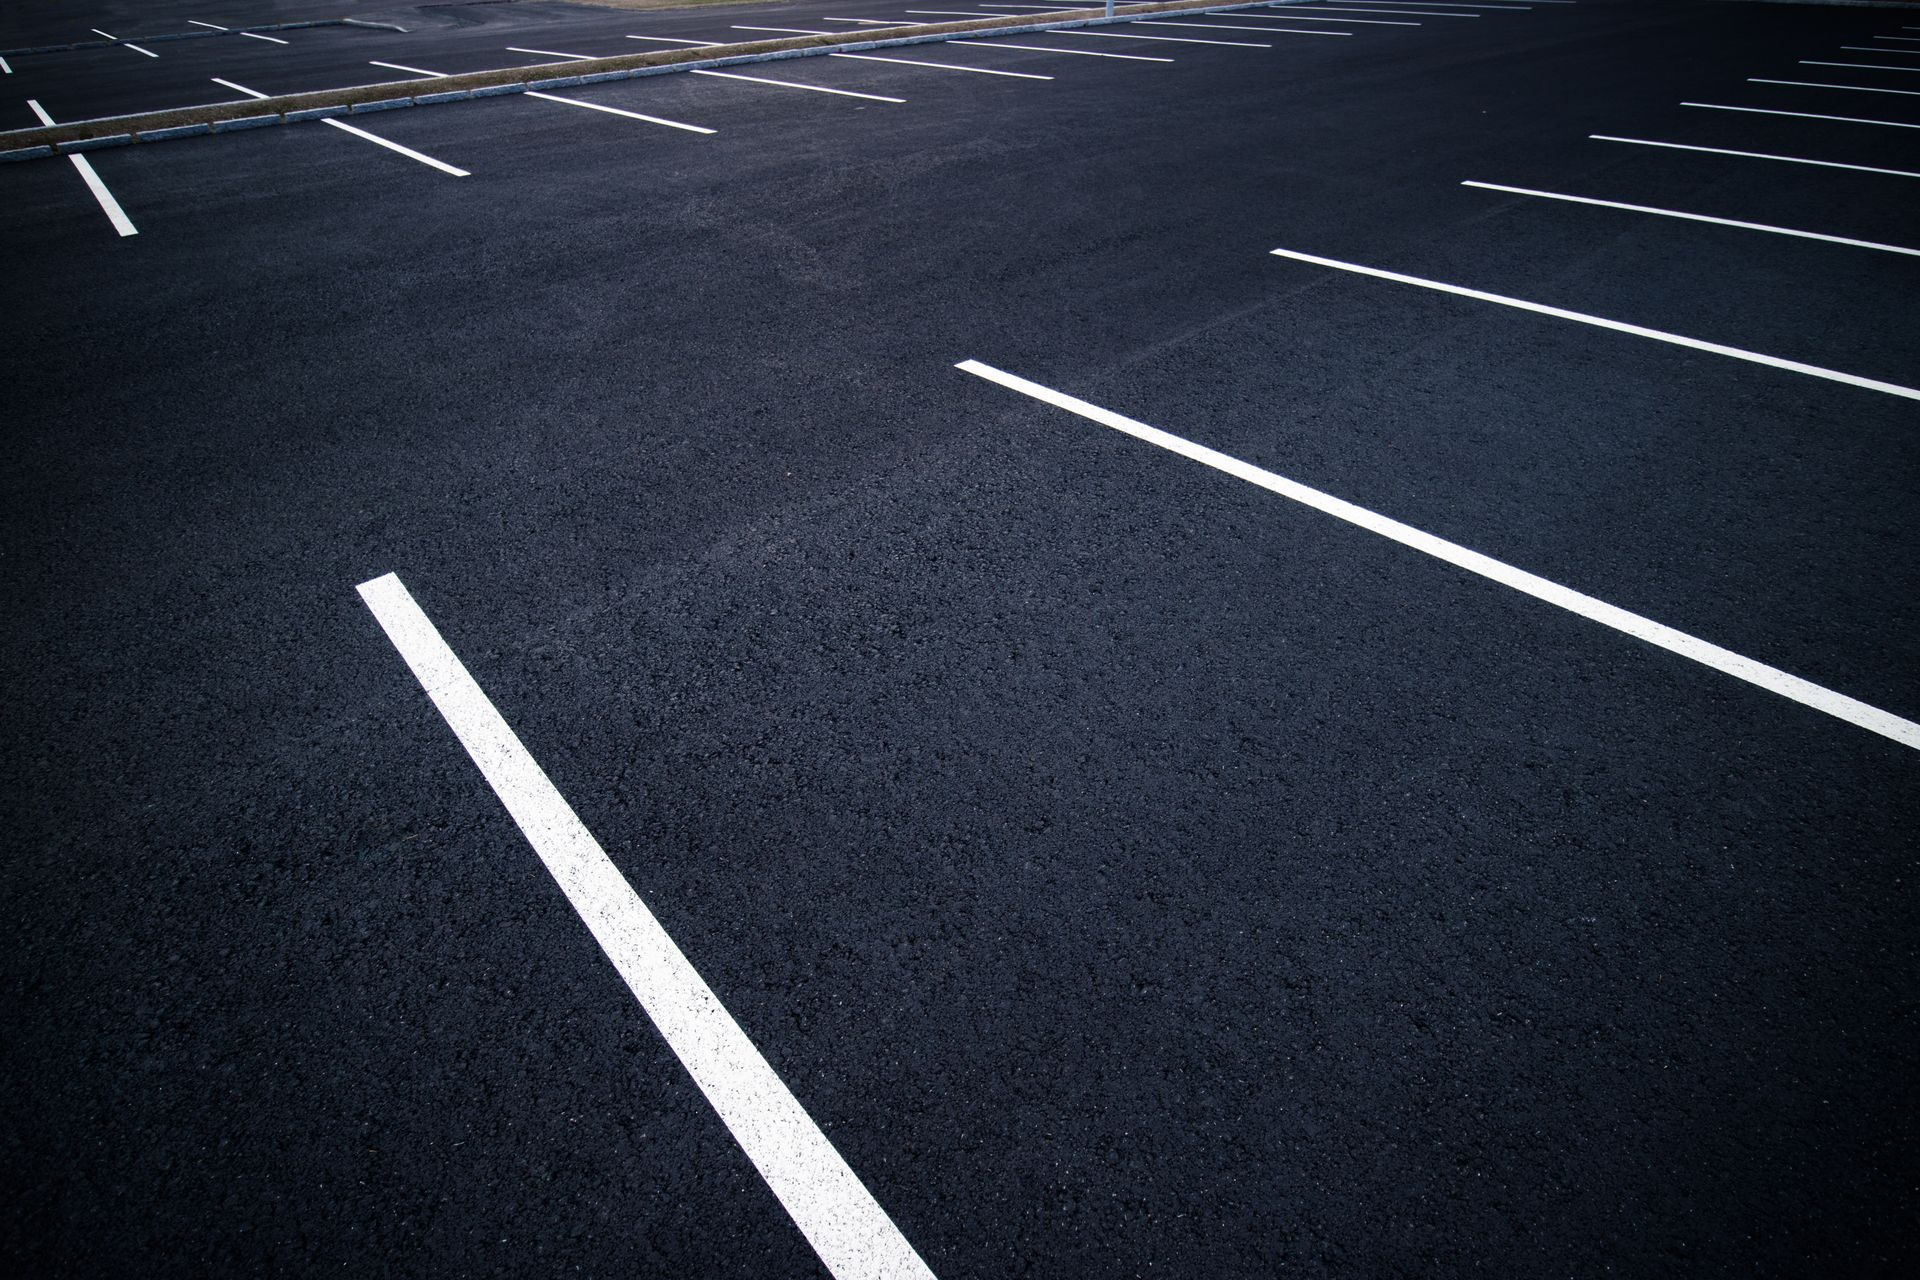 Empty car parking lots with no vehicles in sight, creating a vast expanse of open space and vacant parking spots.